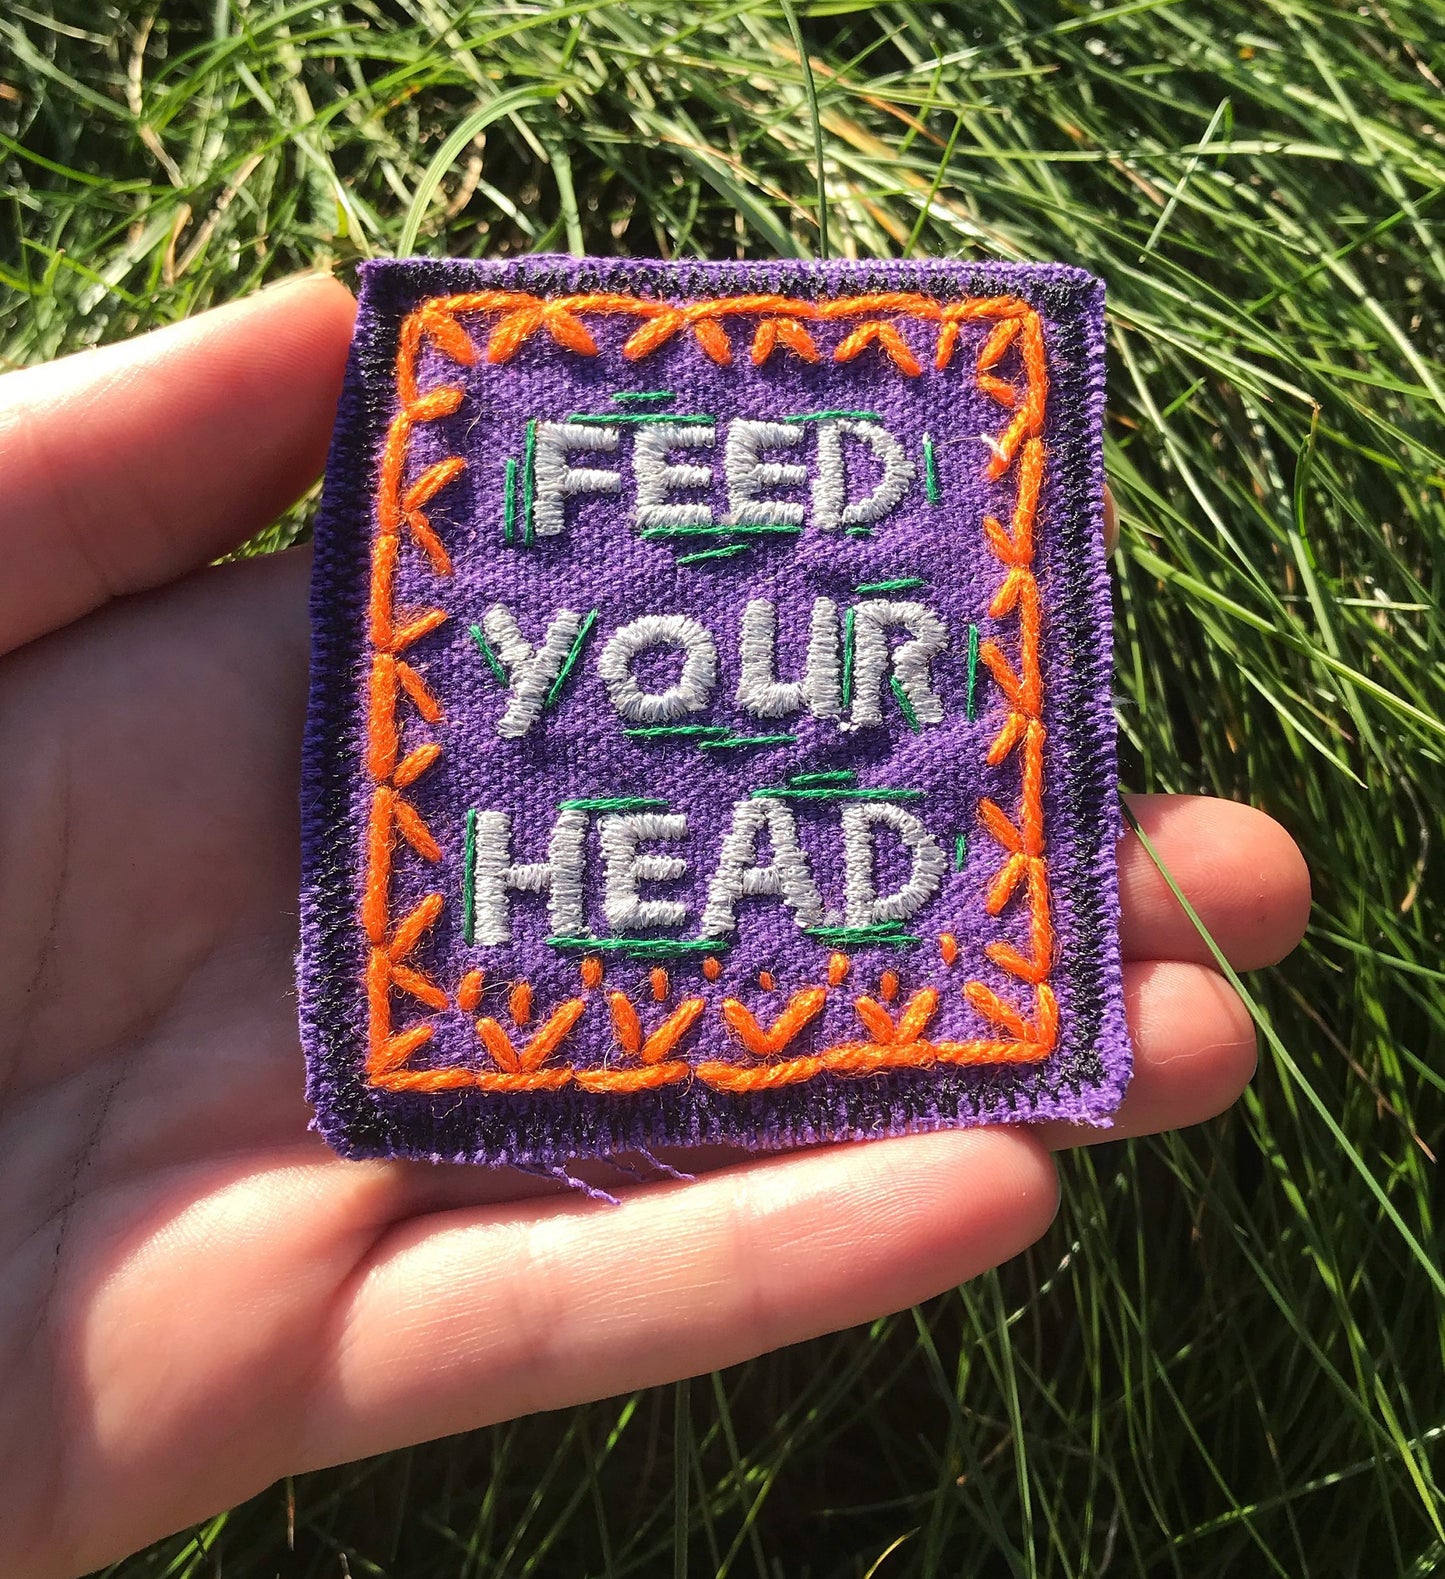 Feed Your Head - Handmade Embroidered Patch